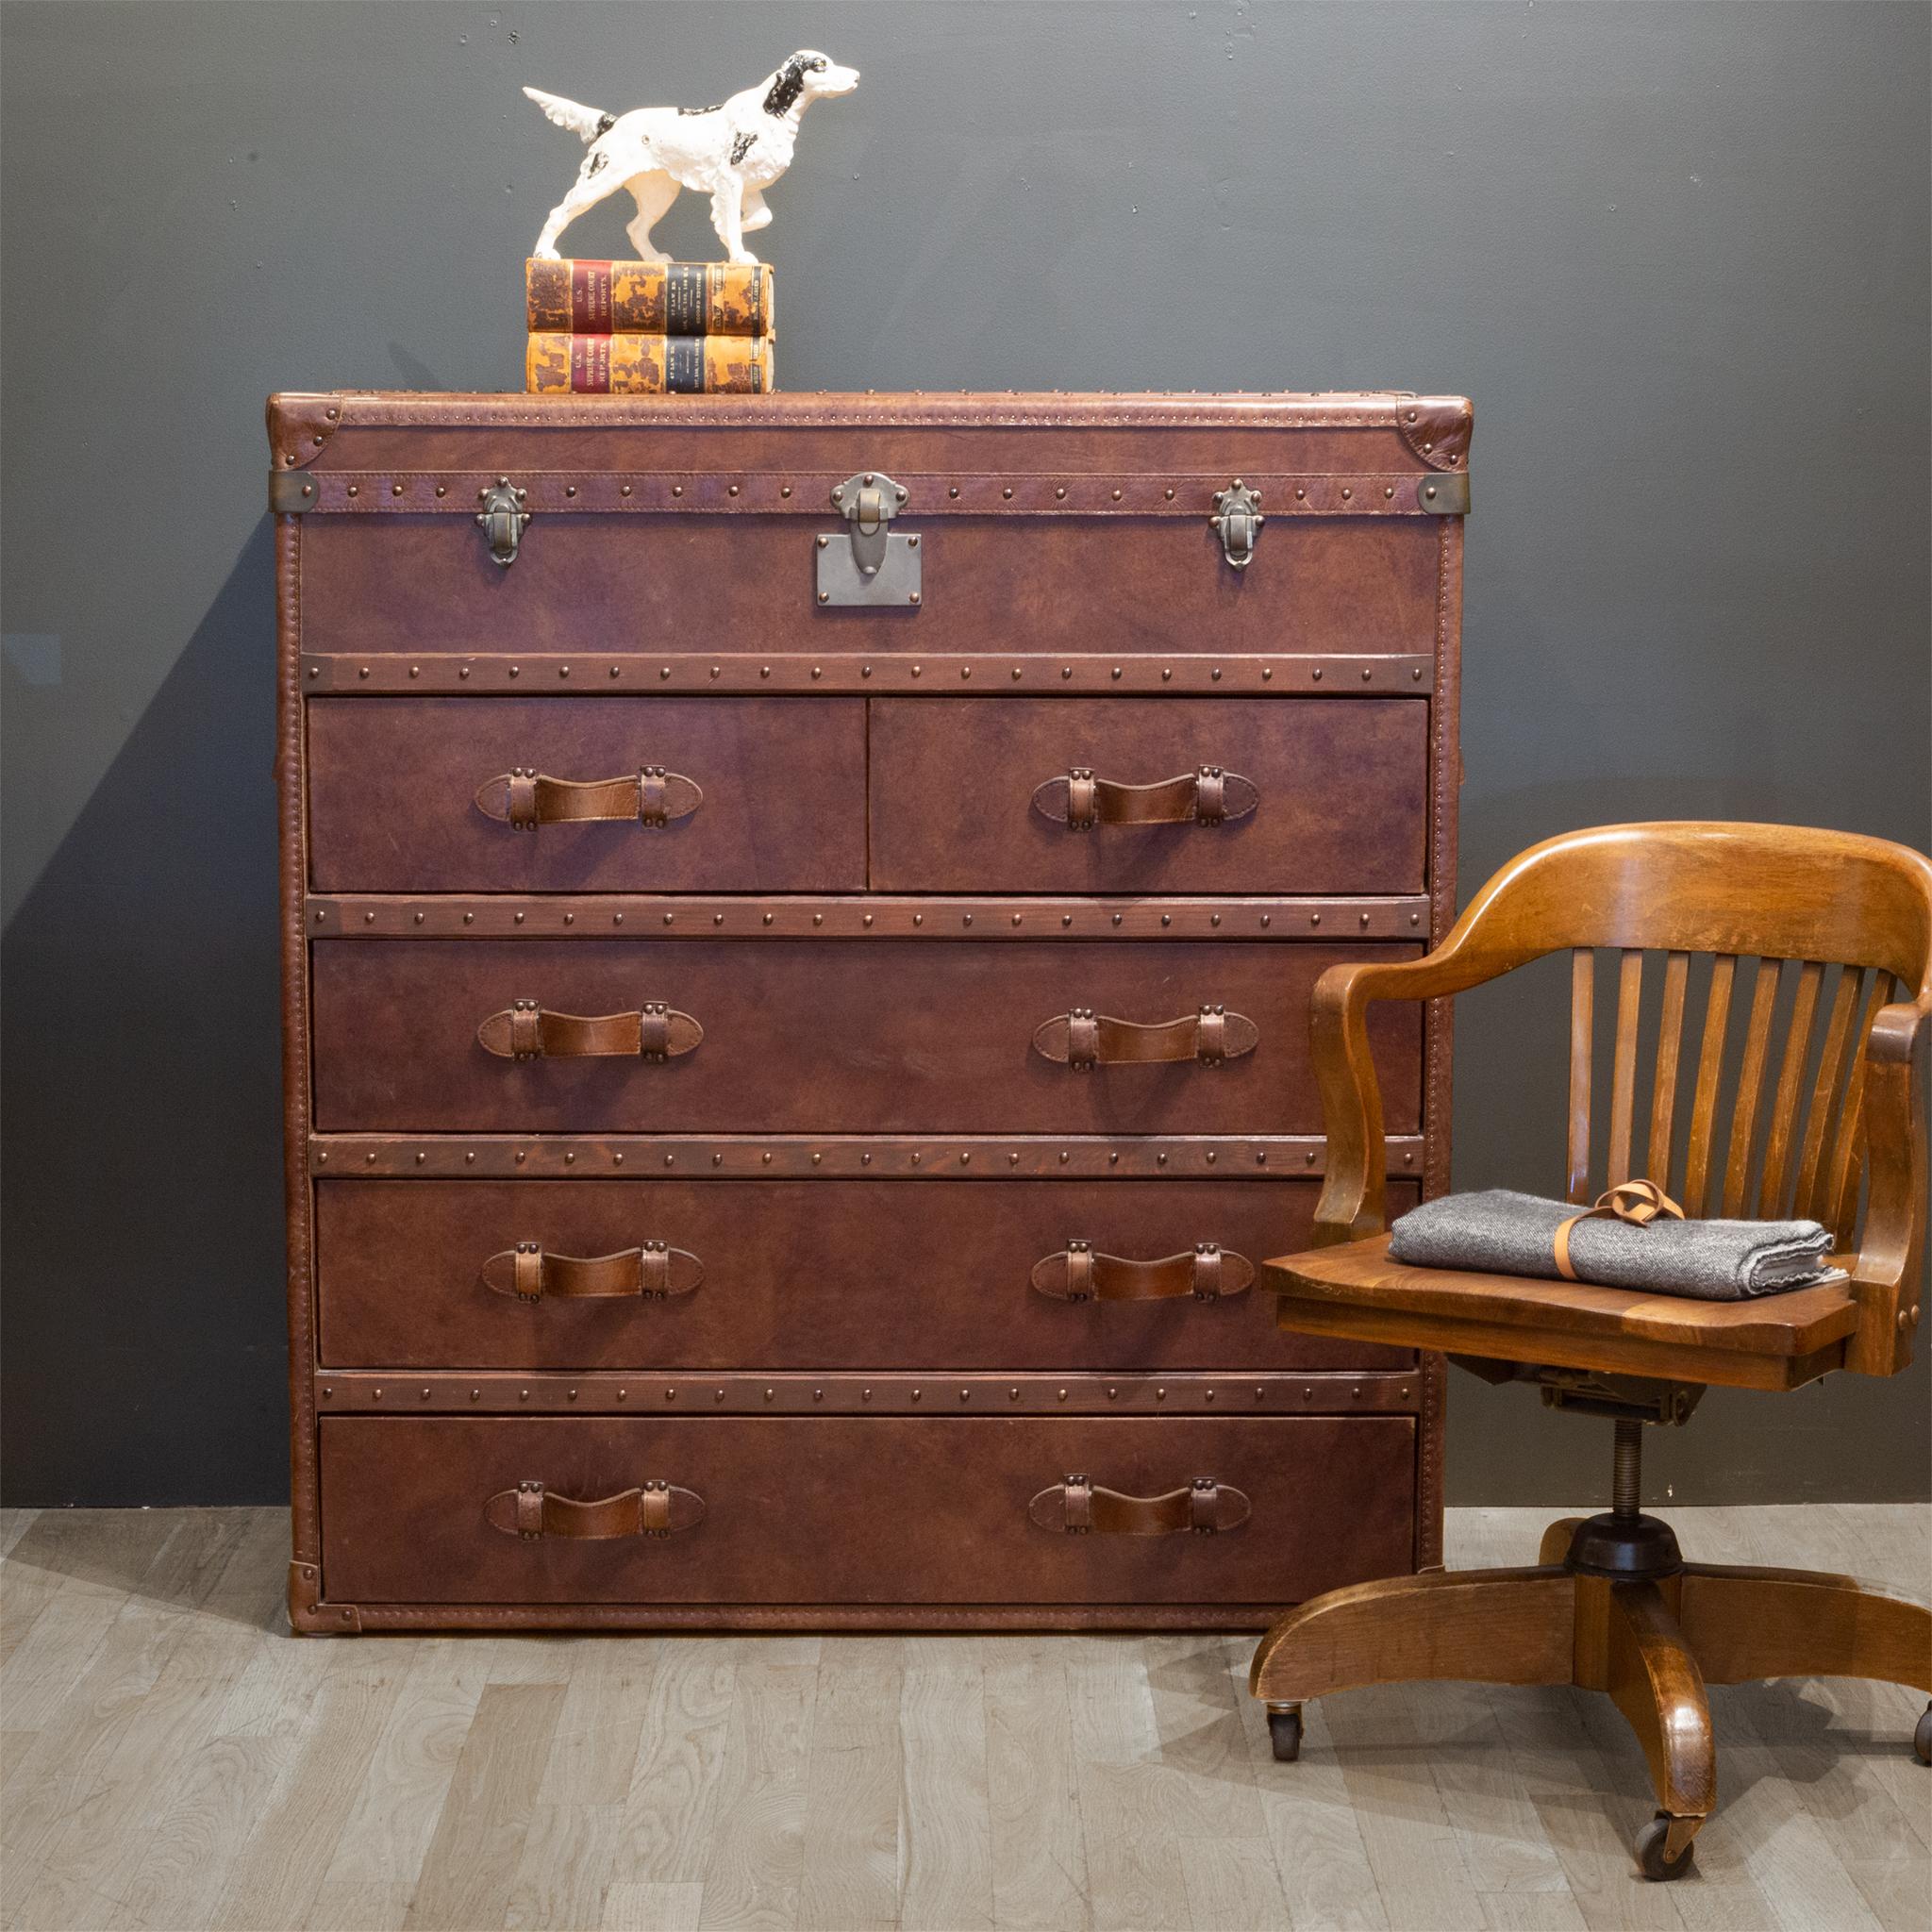 About

Antique style chest calls to mind the luggage once used by rail or ocean voyagers.

 Handmade of distressed vintage Cigar leather over a solid wood frame.
 Aniline-dyed leather has an antiqued, vintage look
 Accented with over 3,000